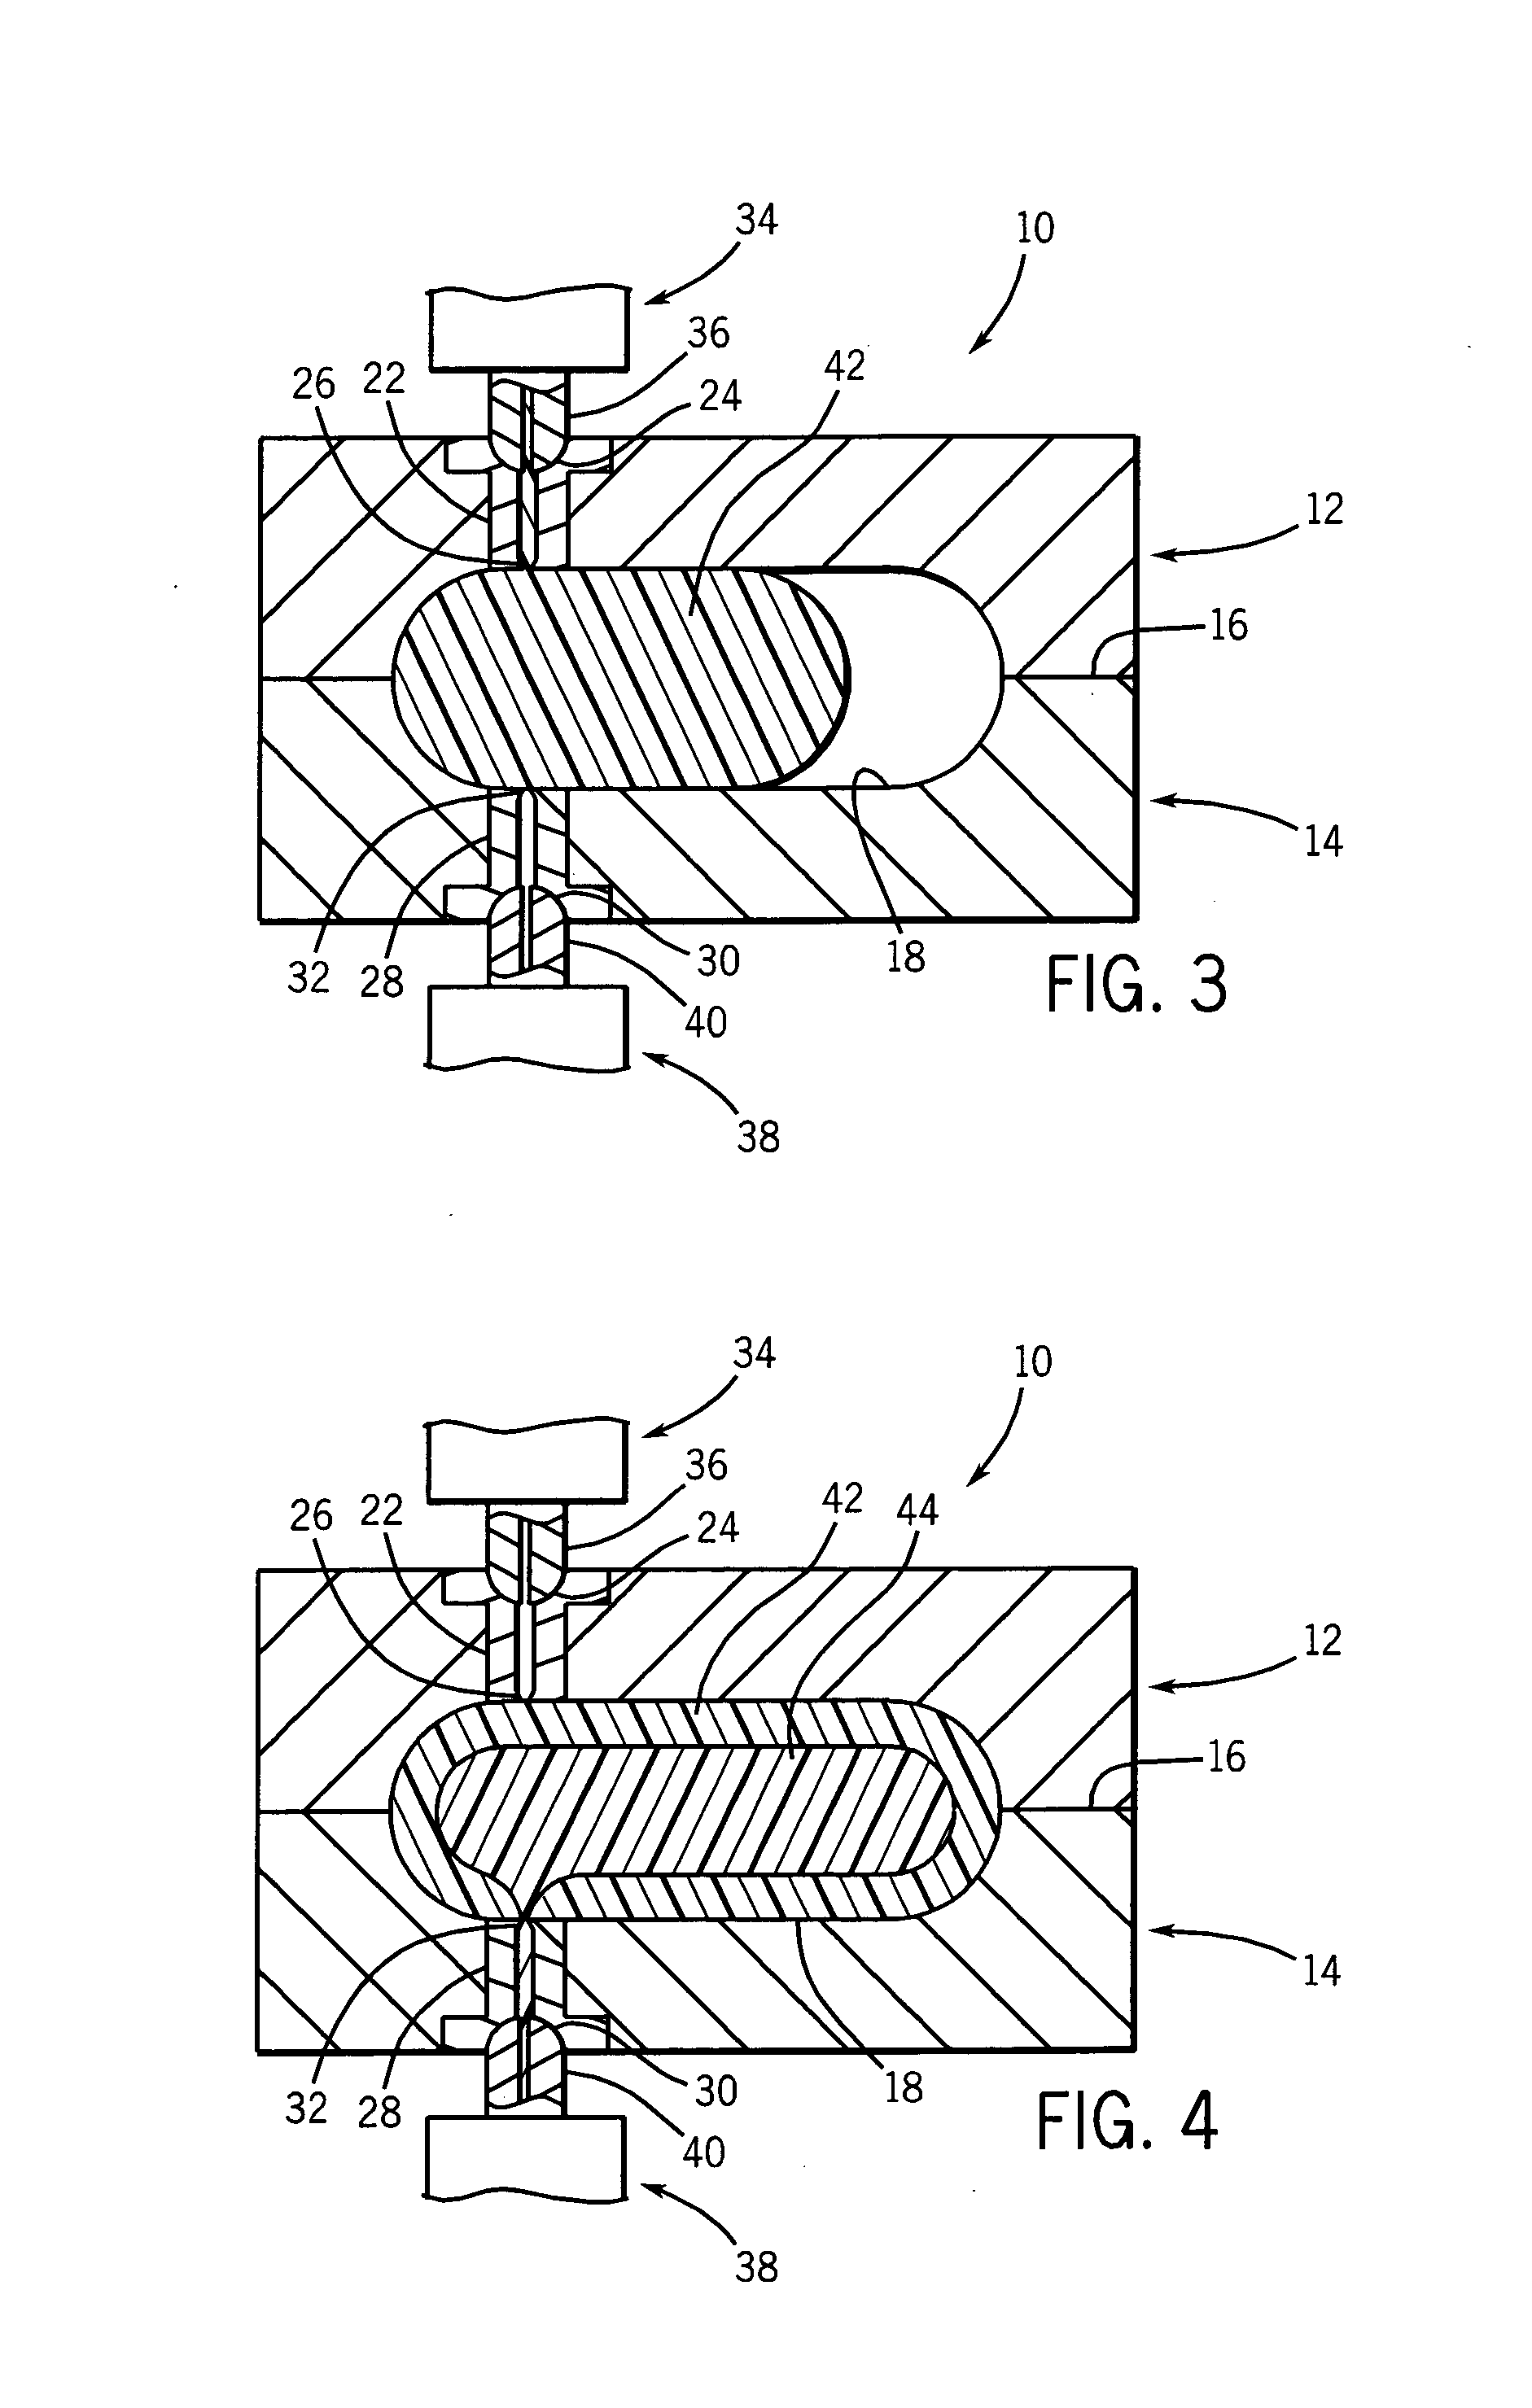 Sandwich molding system with independent runner passages